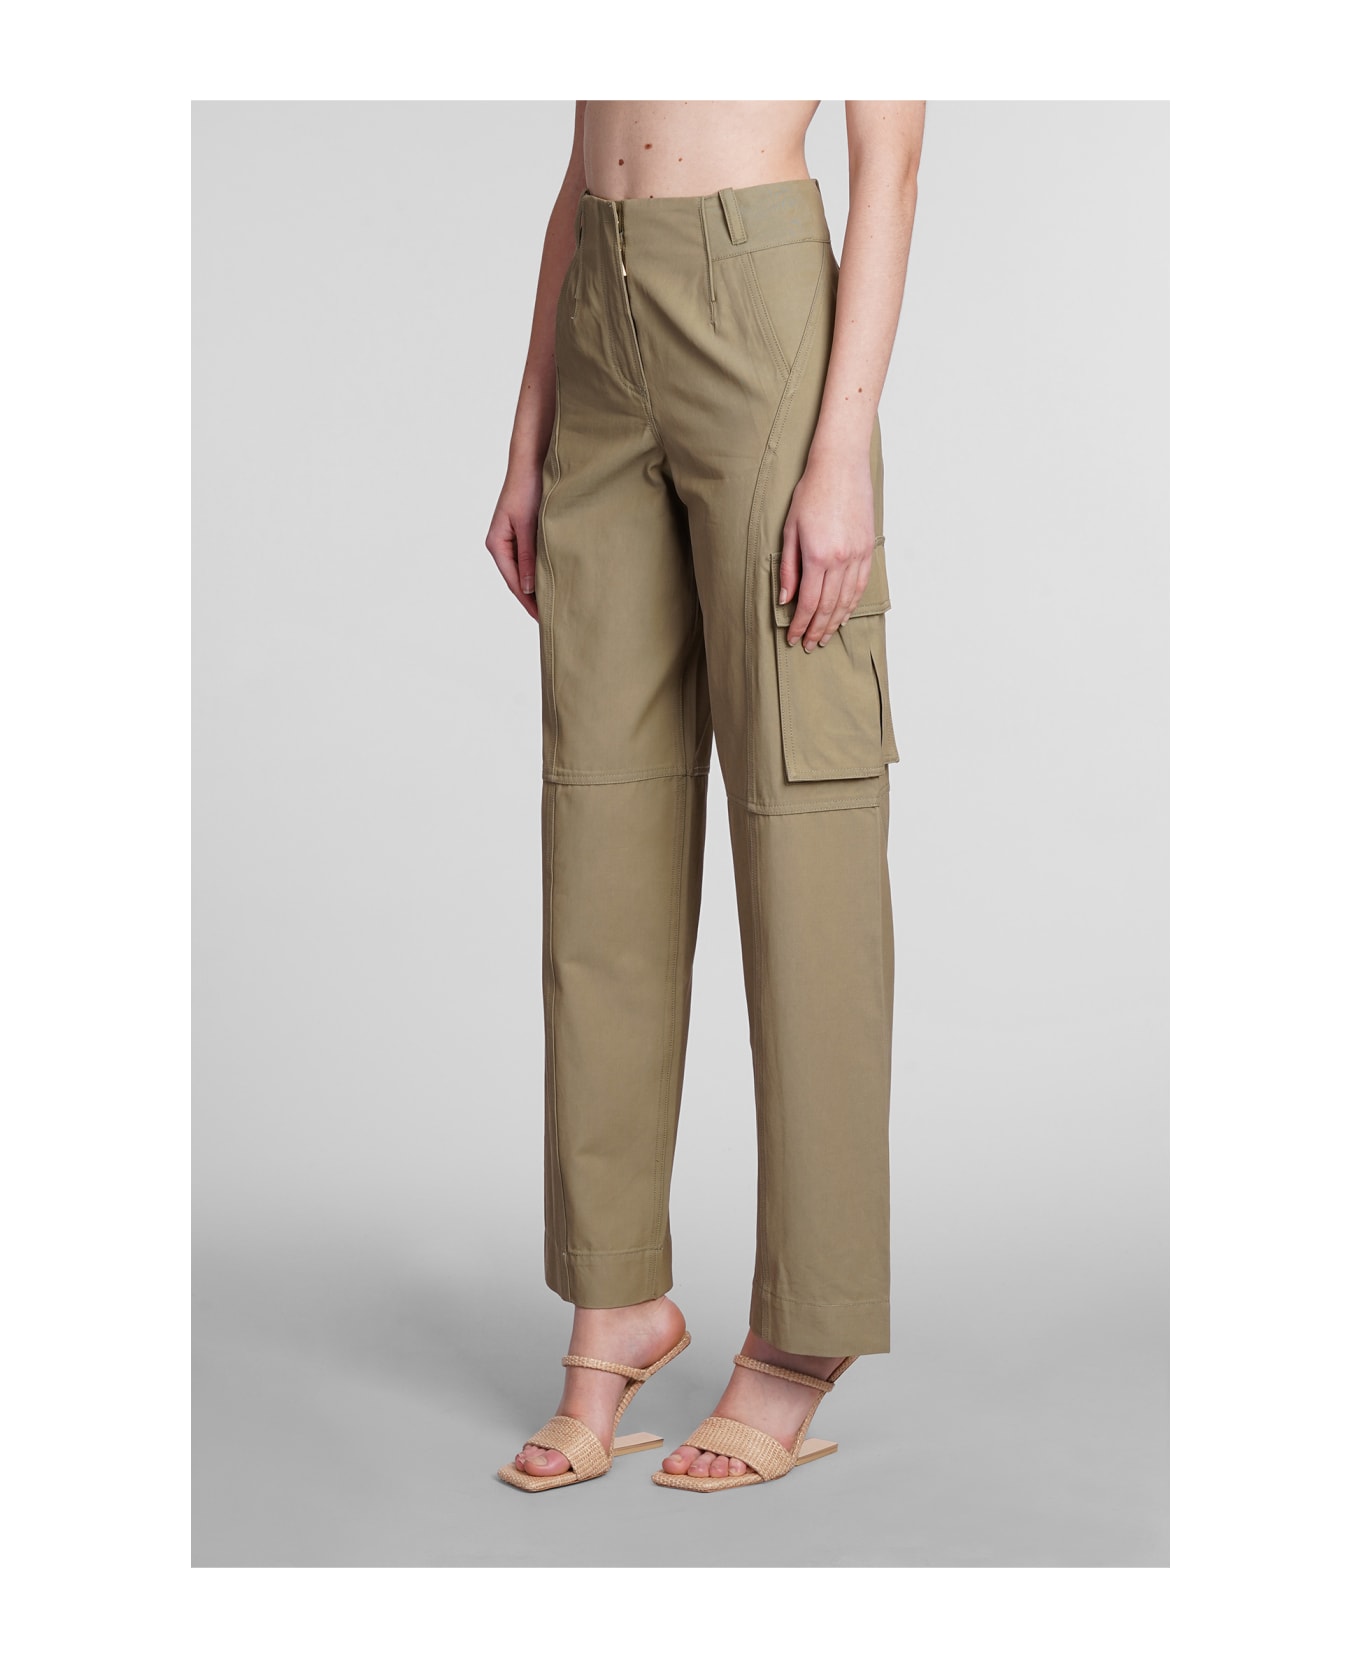 Cult Gaia Adrie Pants In Green Cotton - green ボトムス